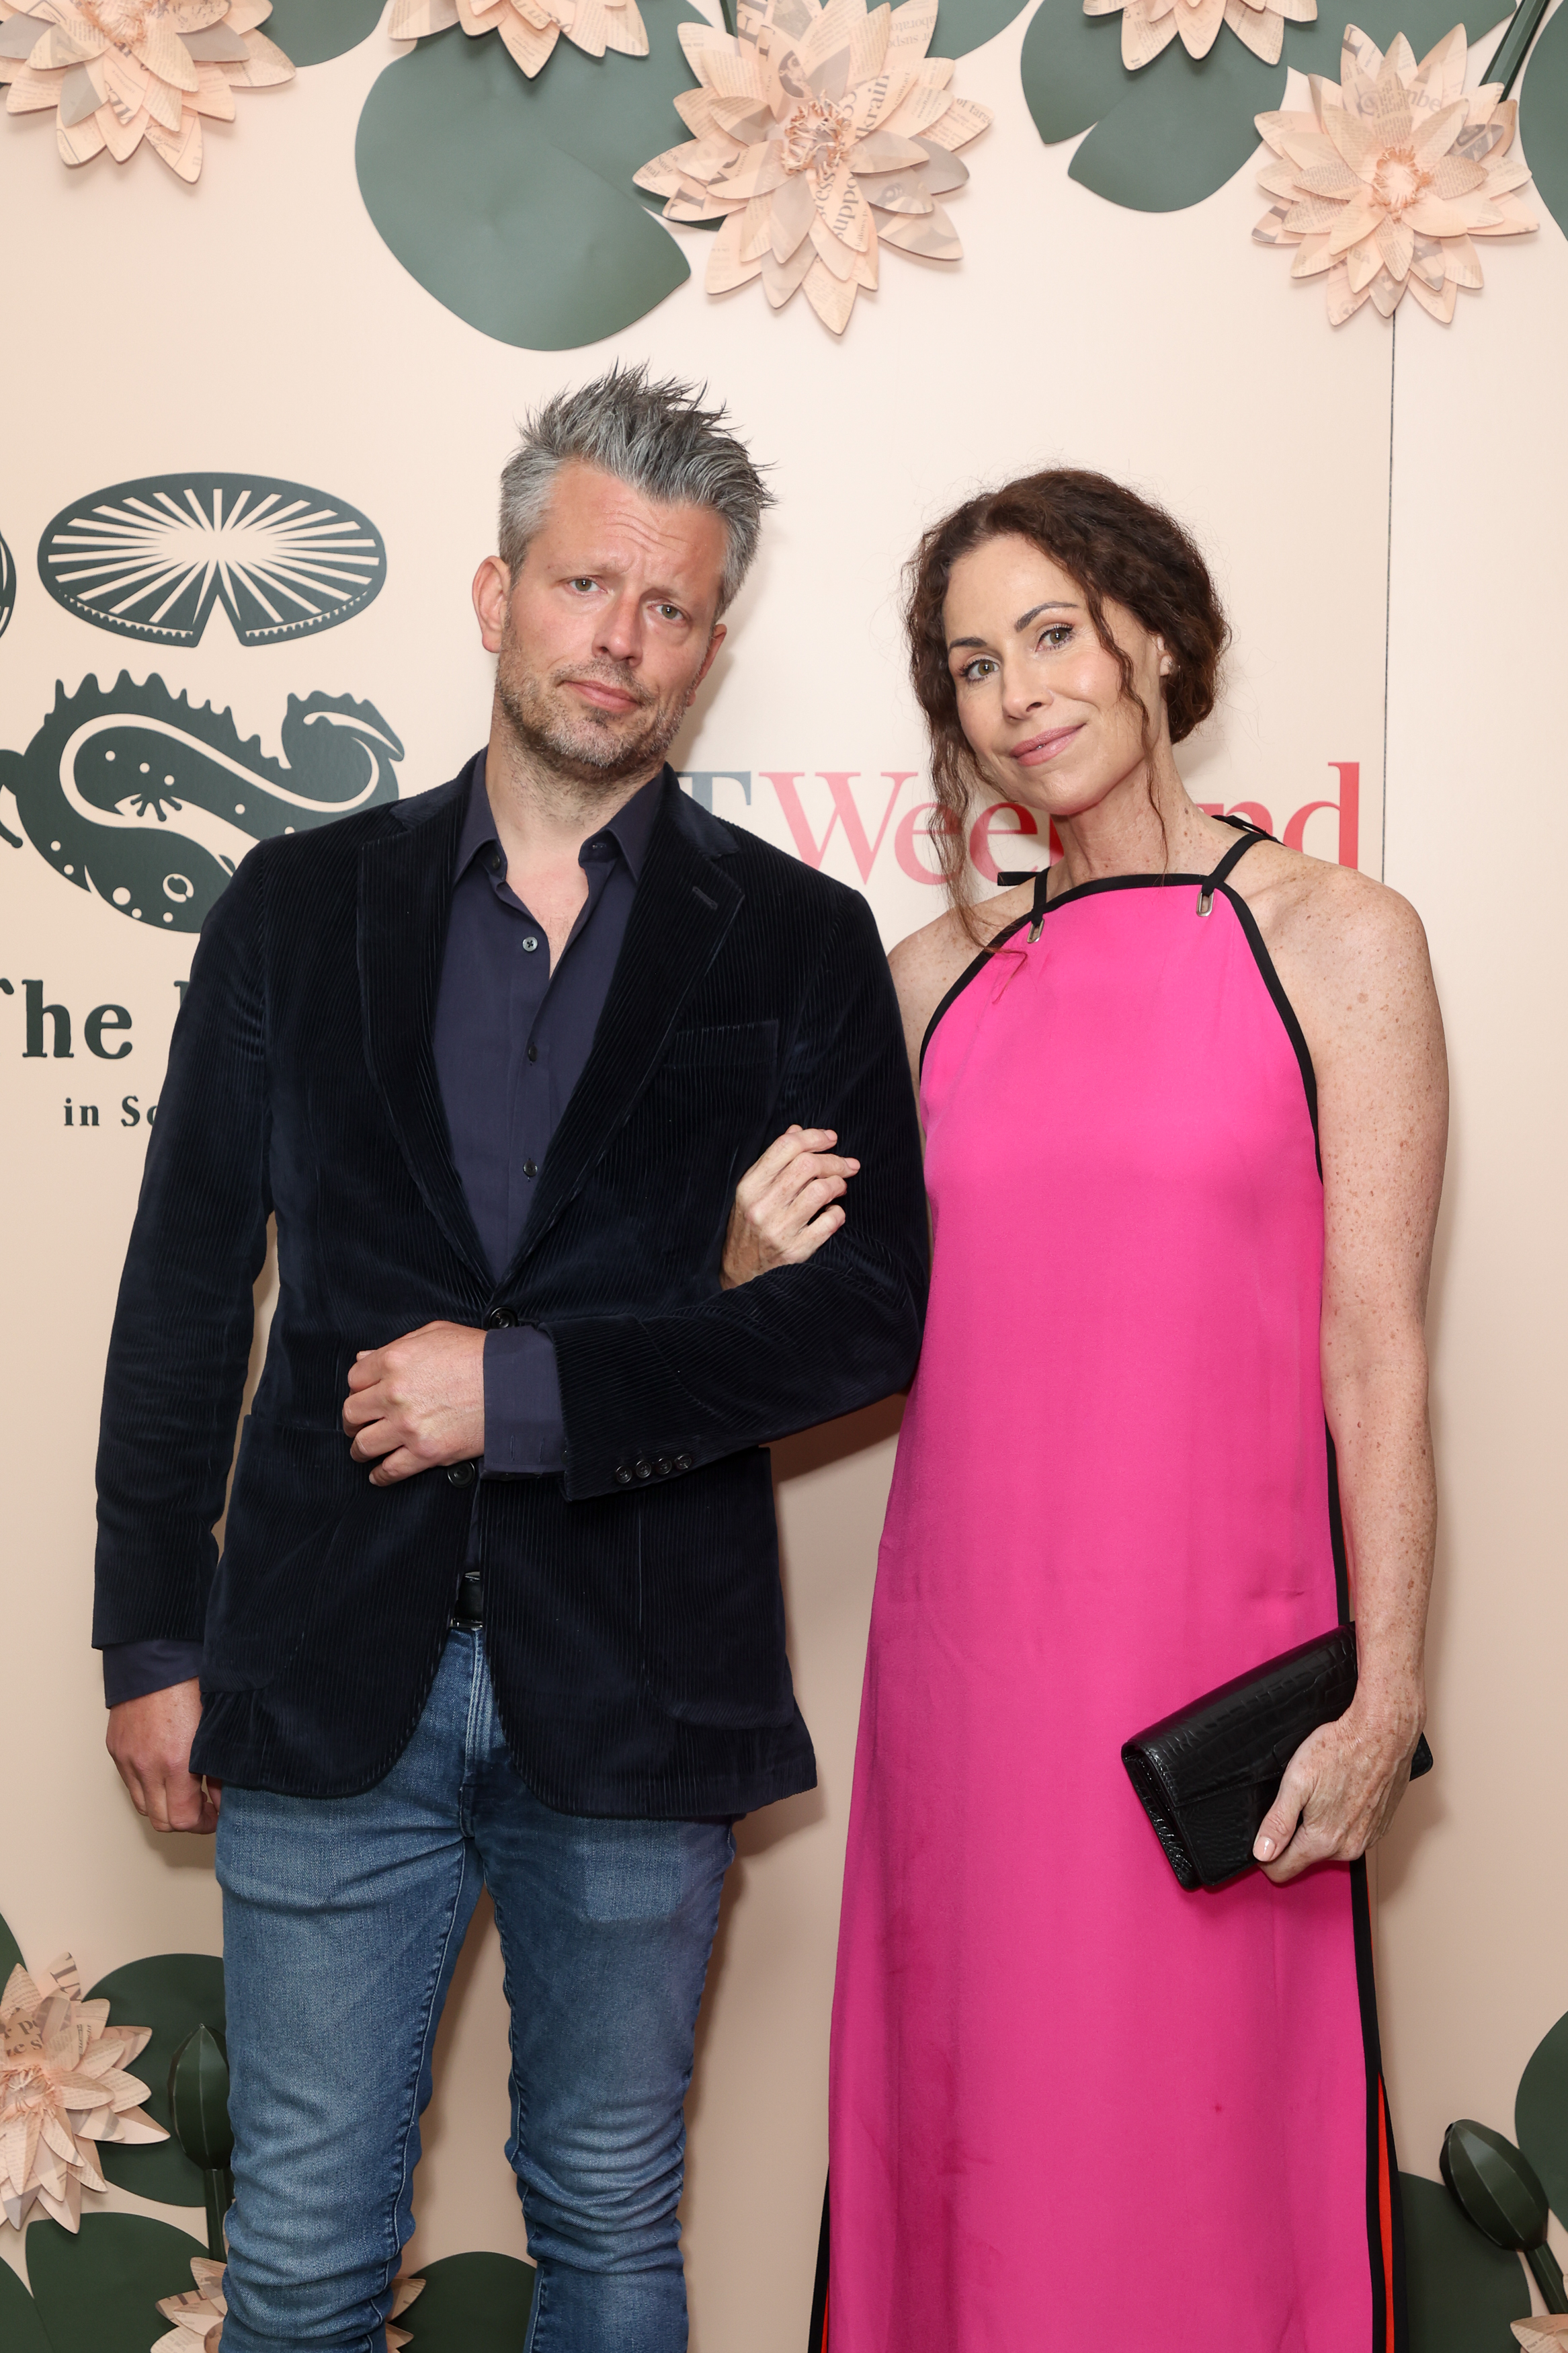 Addison O&#x27;Dea and Minnie Driver standing together. The man wears a dark blazer over a shirt and blue jeans. The woman wears a sleeveless pink dress, holding a black clutch